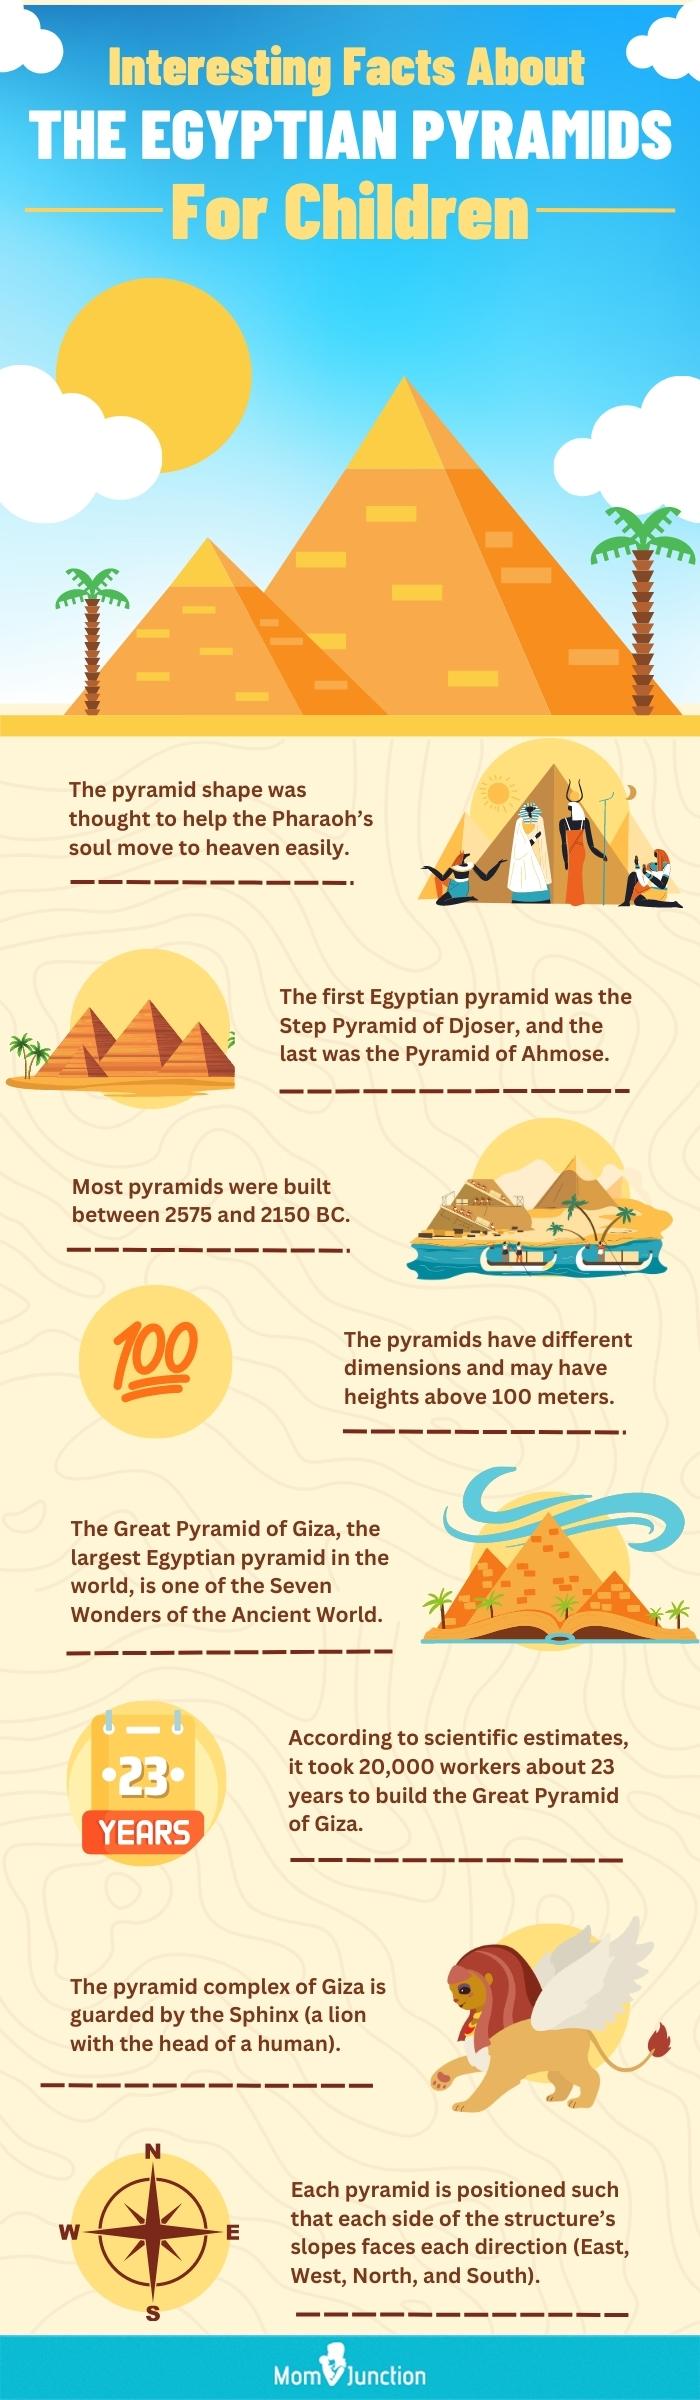 interesting facts about the egyptian pyramids for children (infographic)